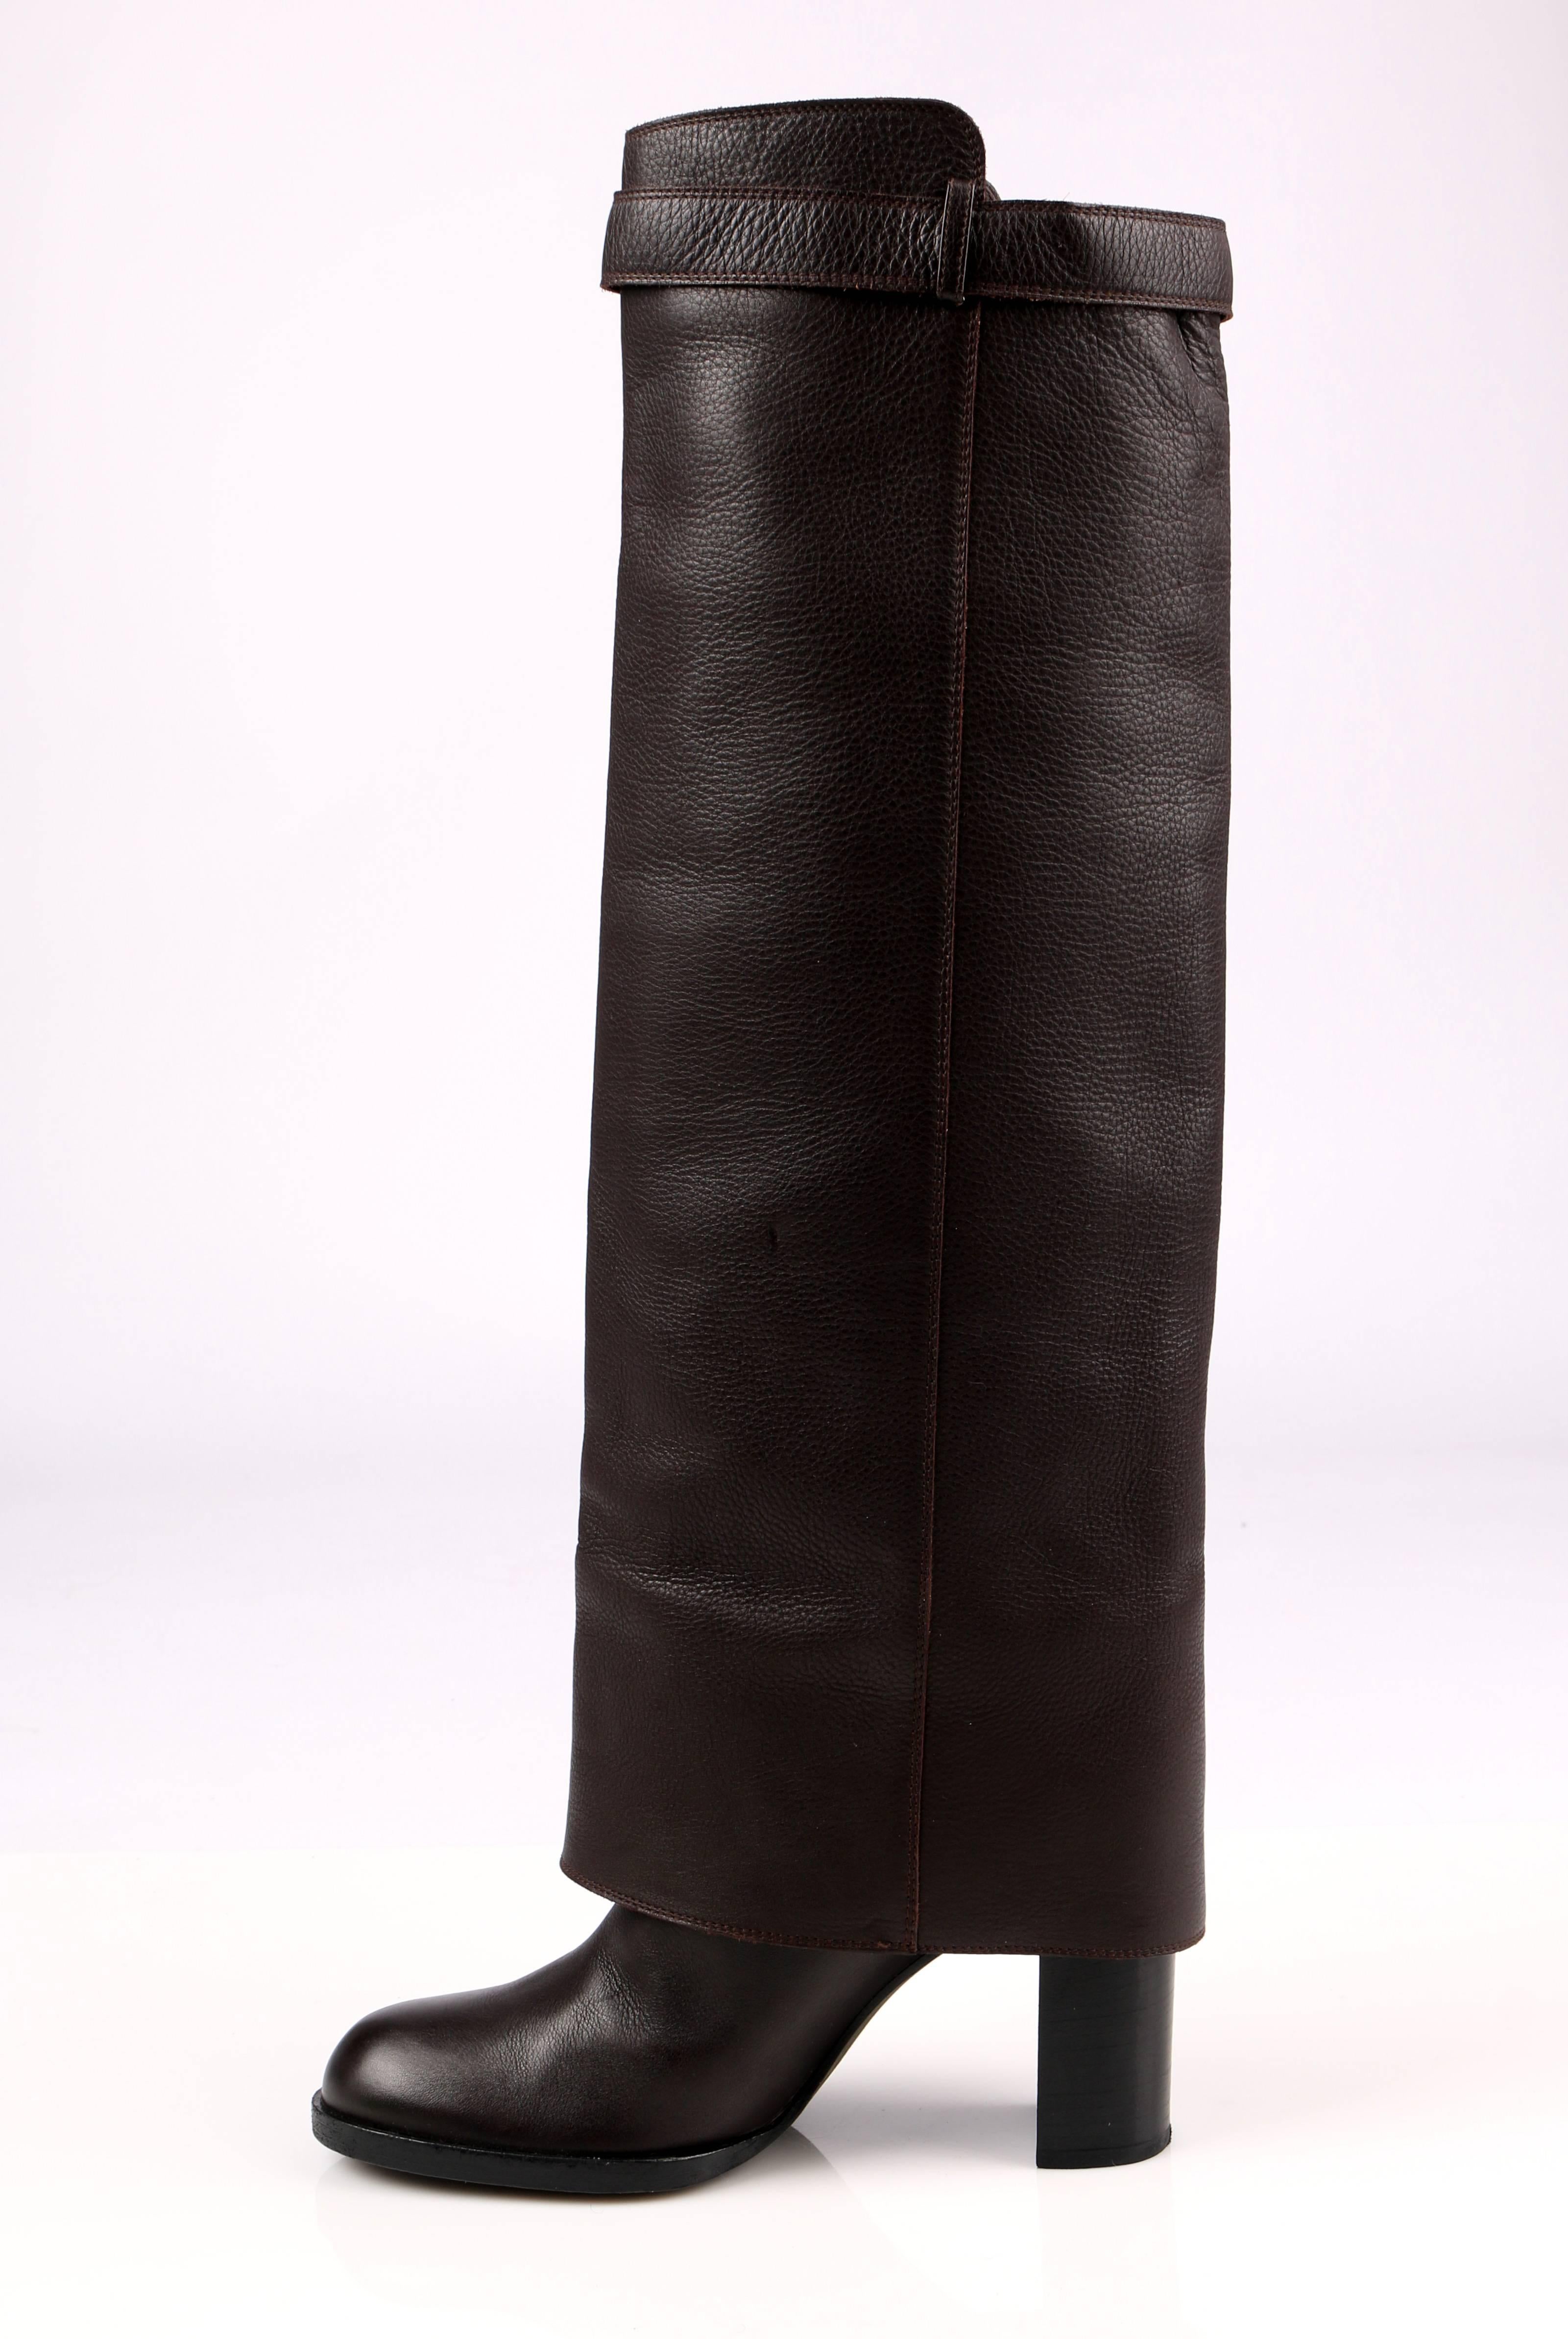 Chanel dark brown leather knee high boots. Fold-over panel with adjustable strap. Silver-tone embossed signature 